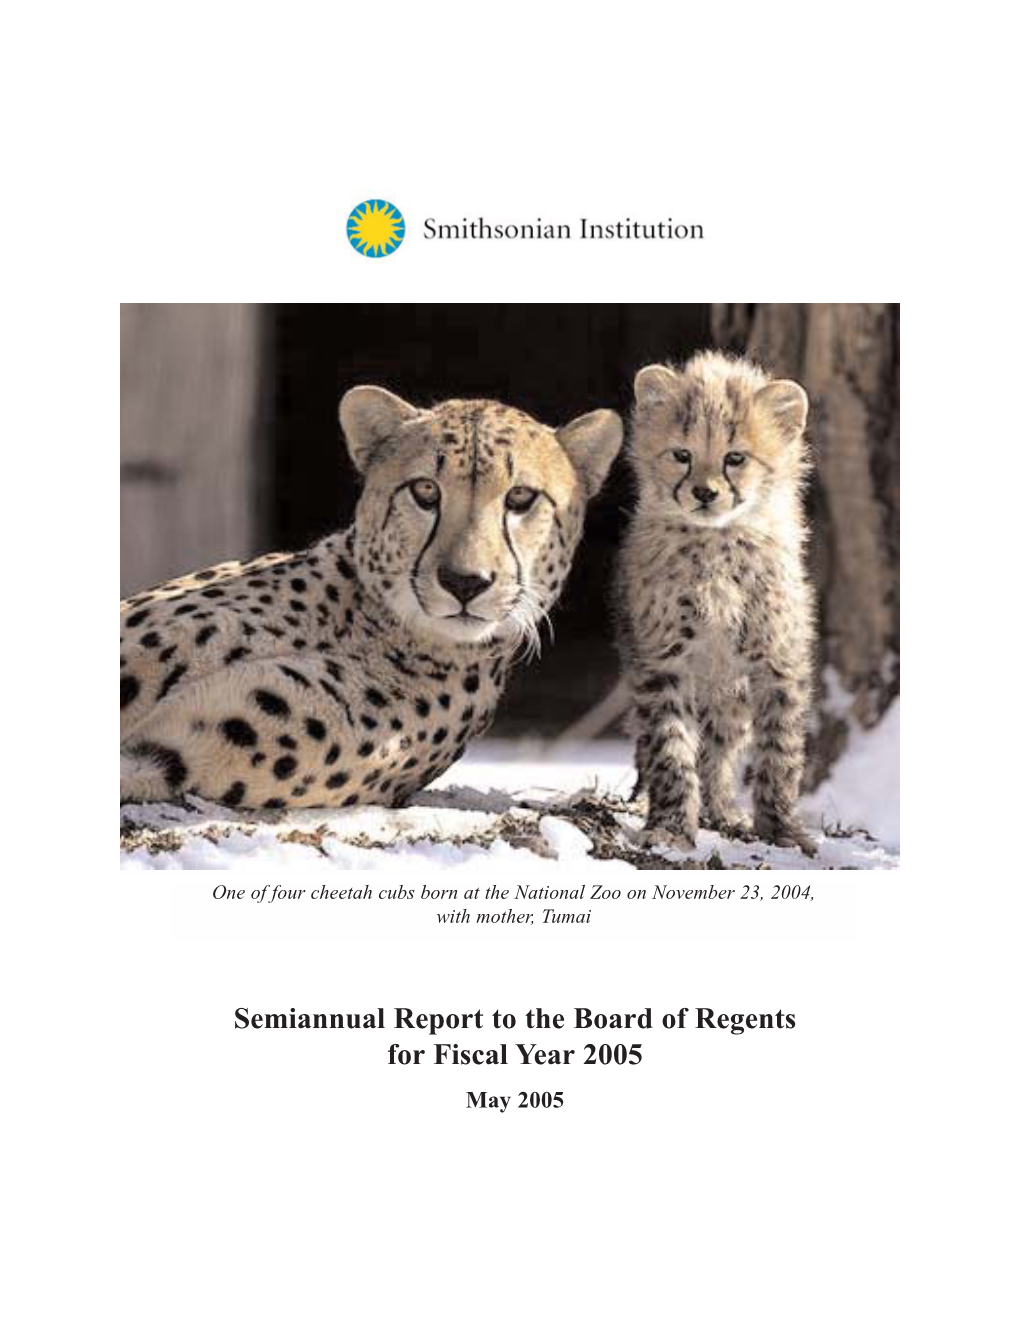 Semiannual Report to the Board of Regents for Fiscal Year 2005